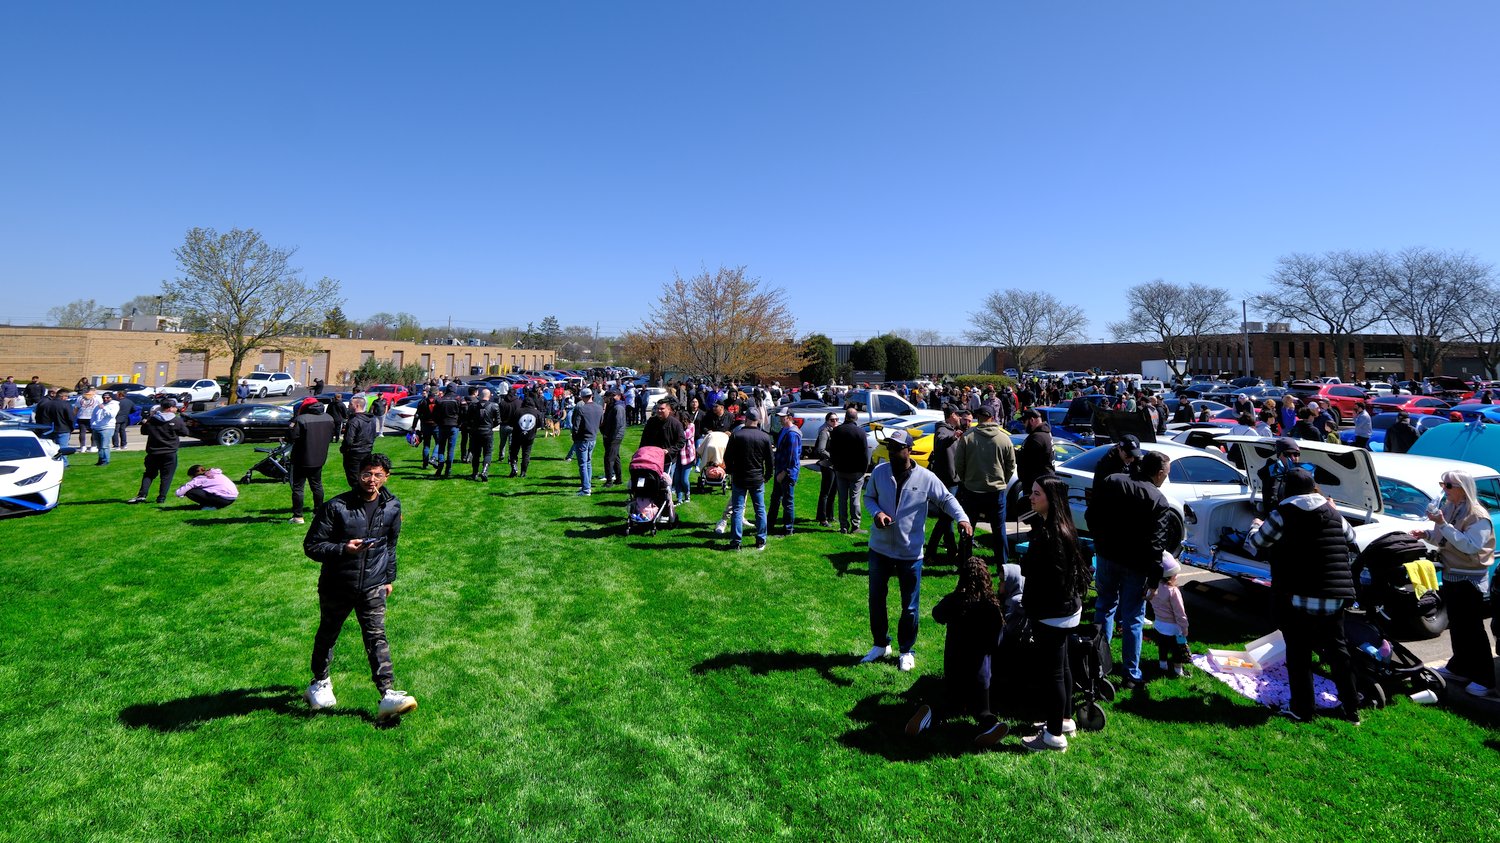 Blue skies, green grass, and a ton of car lovers.